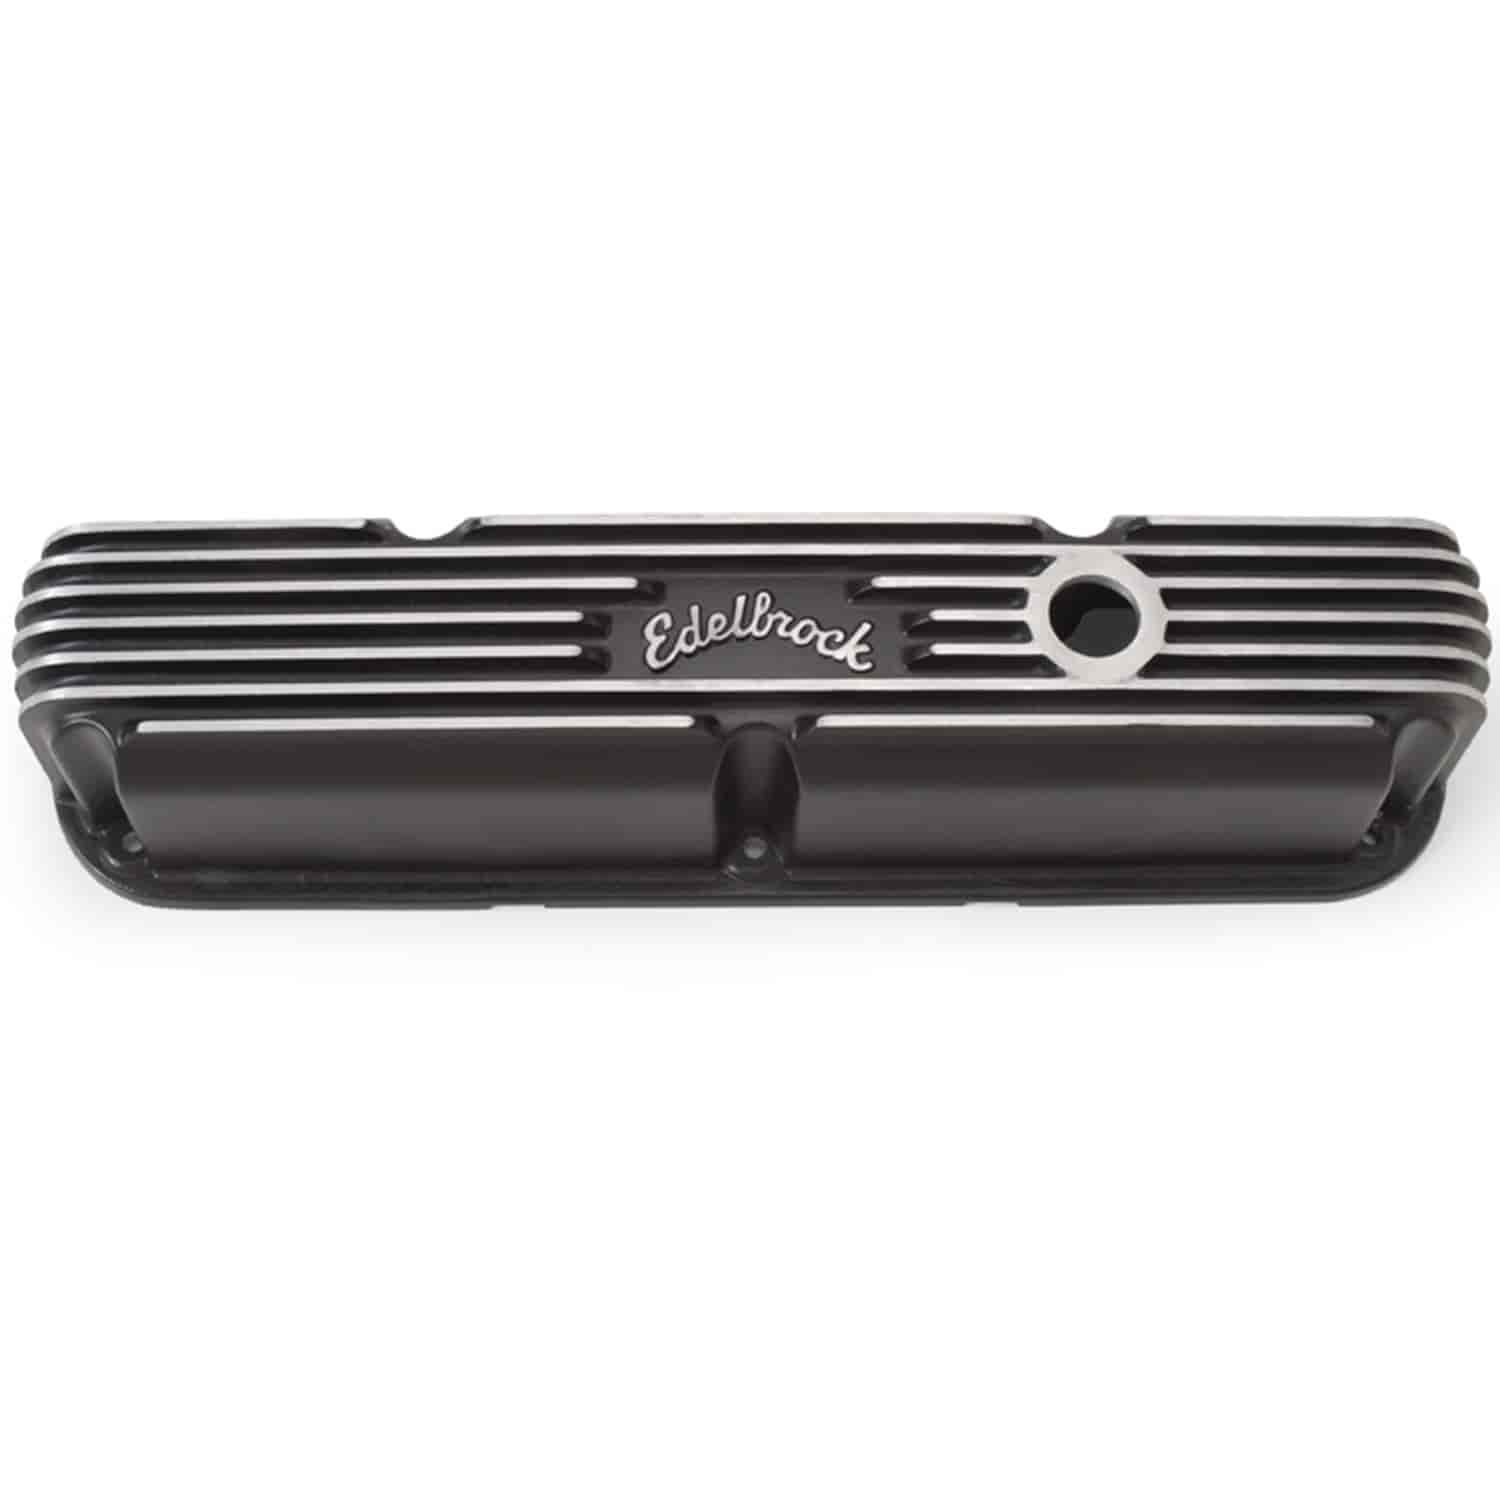 Classic Finned Valve Covers for Small Block Chrysler 318-360 LA Series with Black Powder Coated Finish